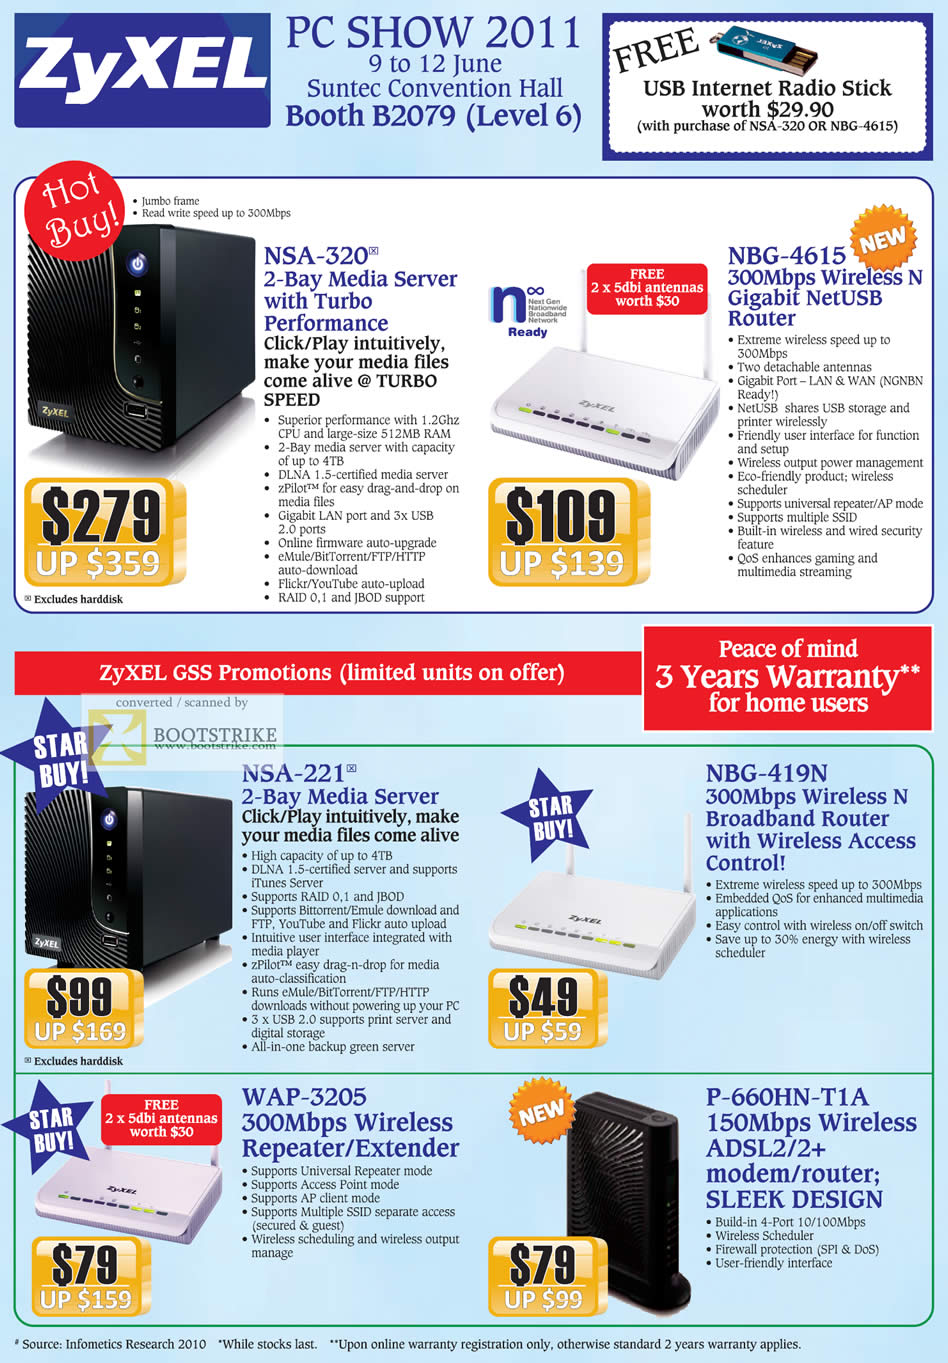 PC Show 2011 price list image brochure of ZyXEL Networking NS-320 NAS NBG-4615 Wireless Router USB NSA-221 NBG-419N WAP-3205 Repeater Extender P-660HN-T1A ADSL2 Modem